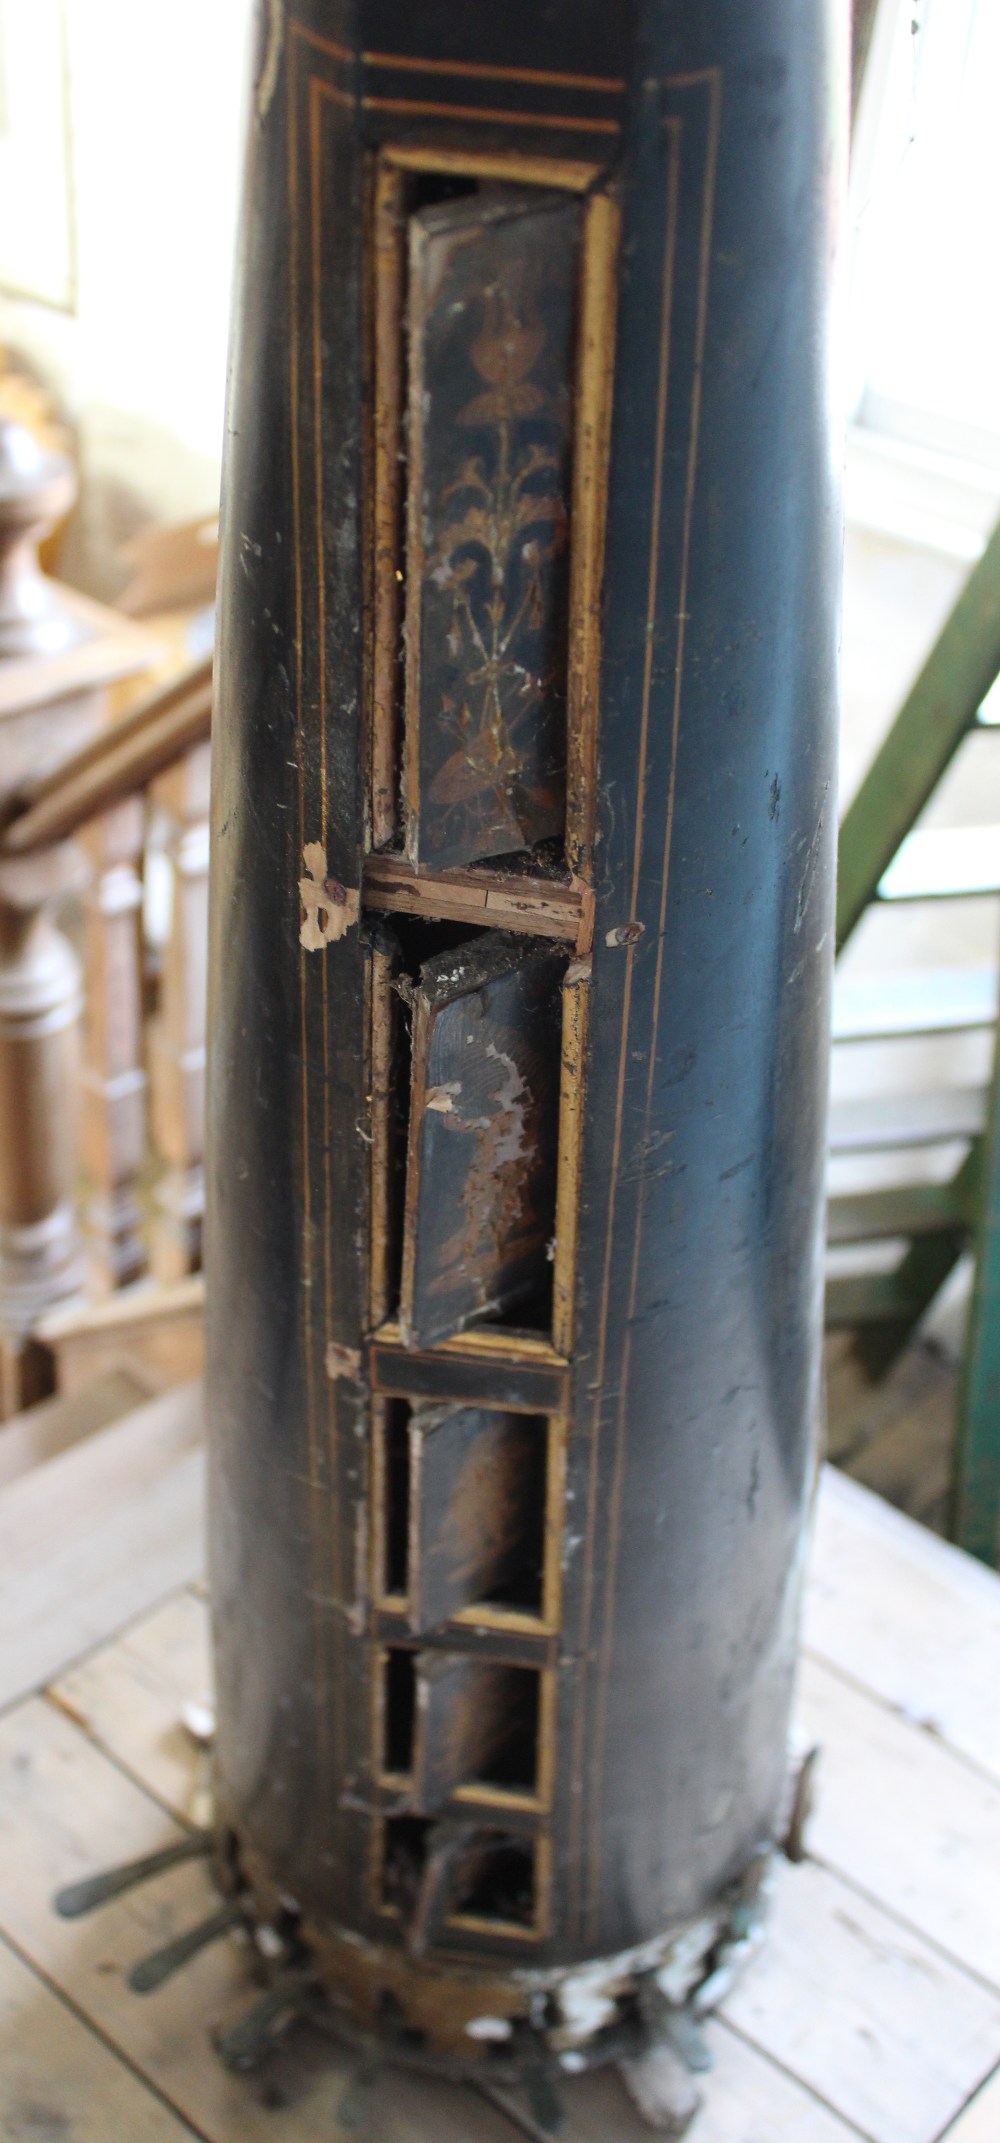 An early 19th century gilt wood and gesso harp by Sebastian Erard, in need of complete restoration, - Image 15 of 16